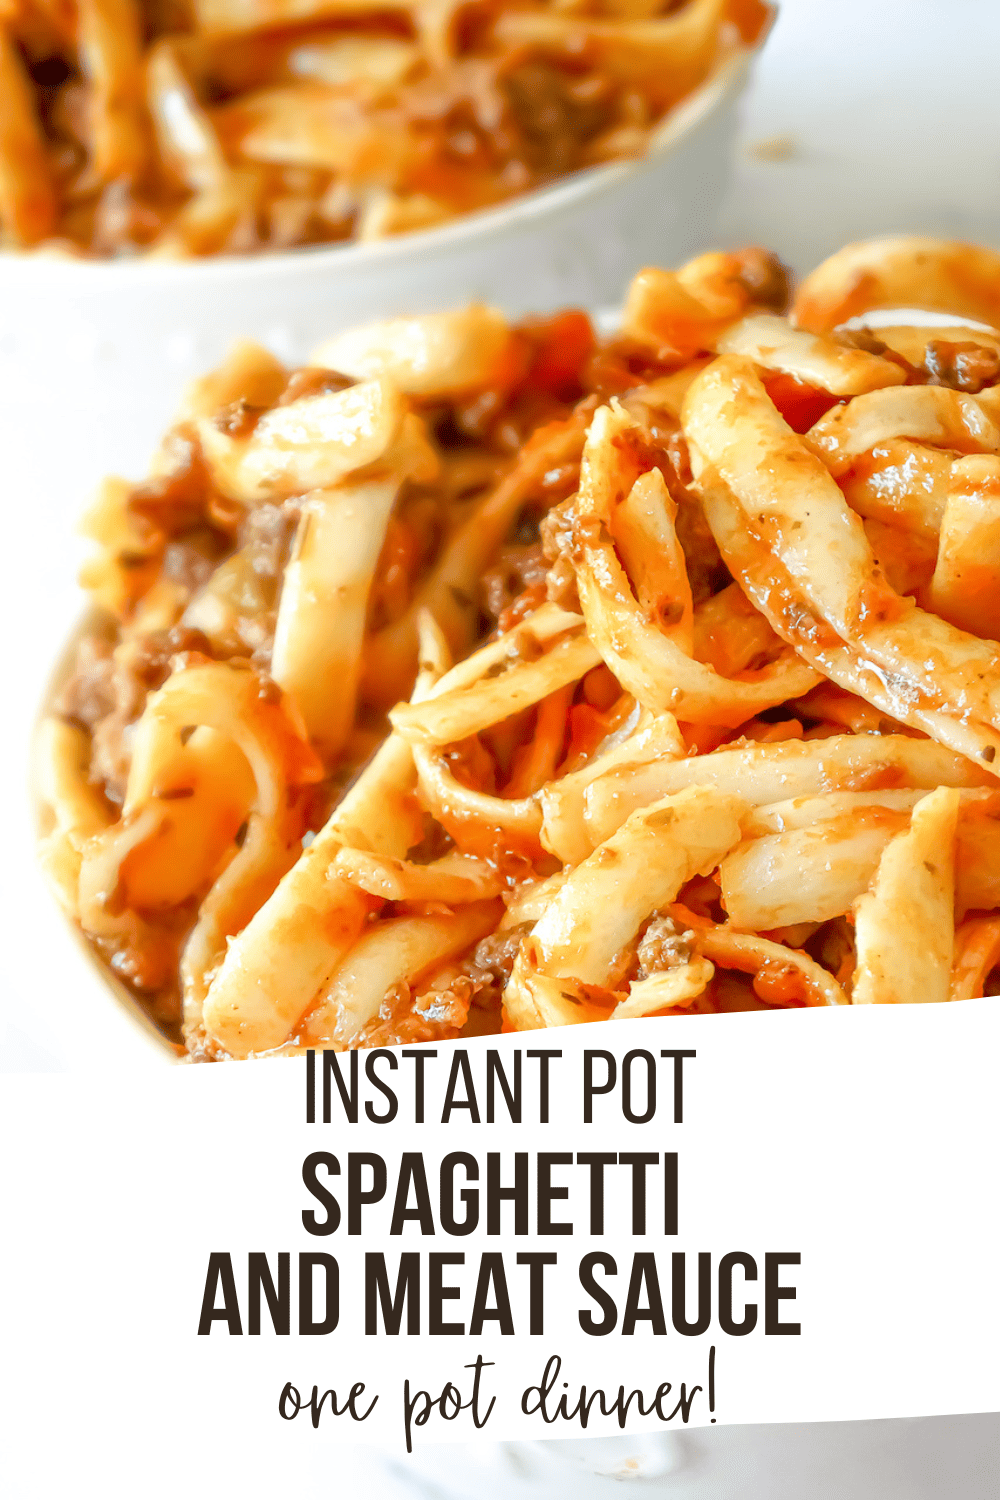 Quick & Easy Instant Pot Spaghetti and Meat Sauce Recipe